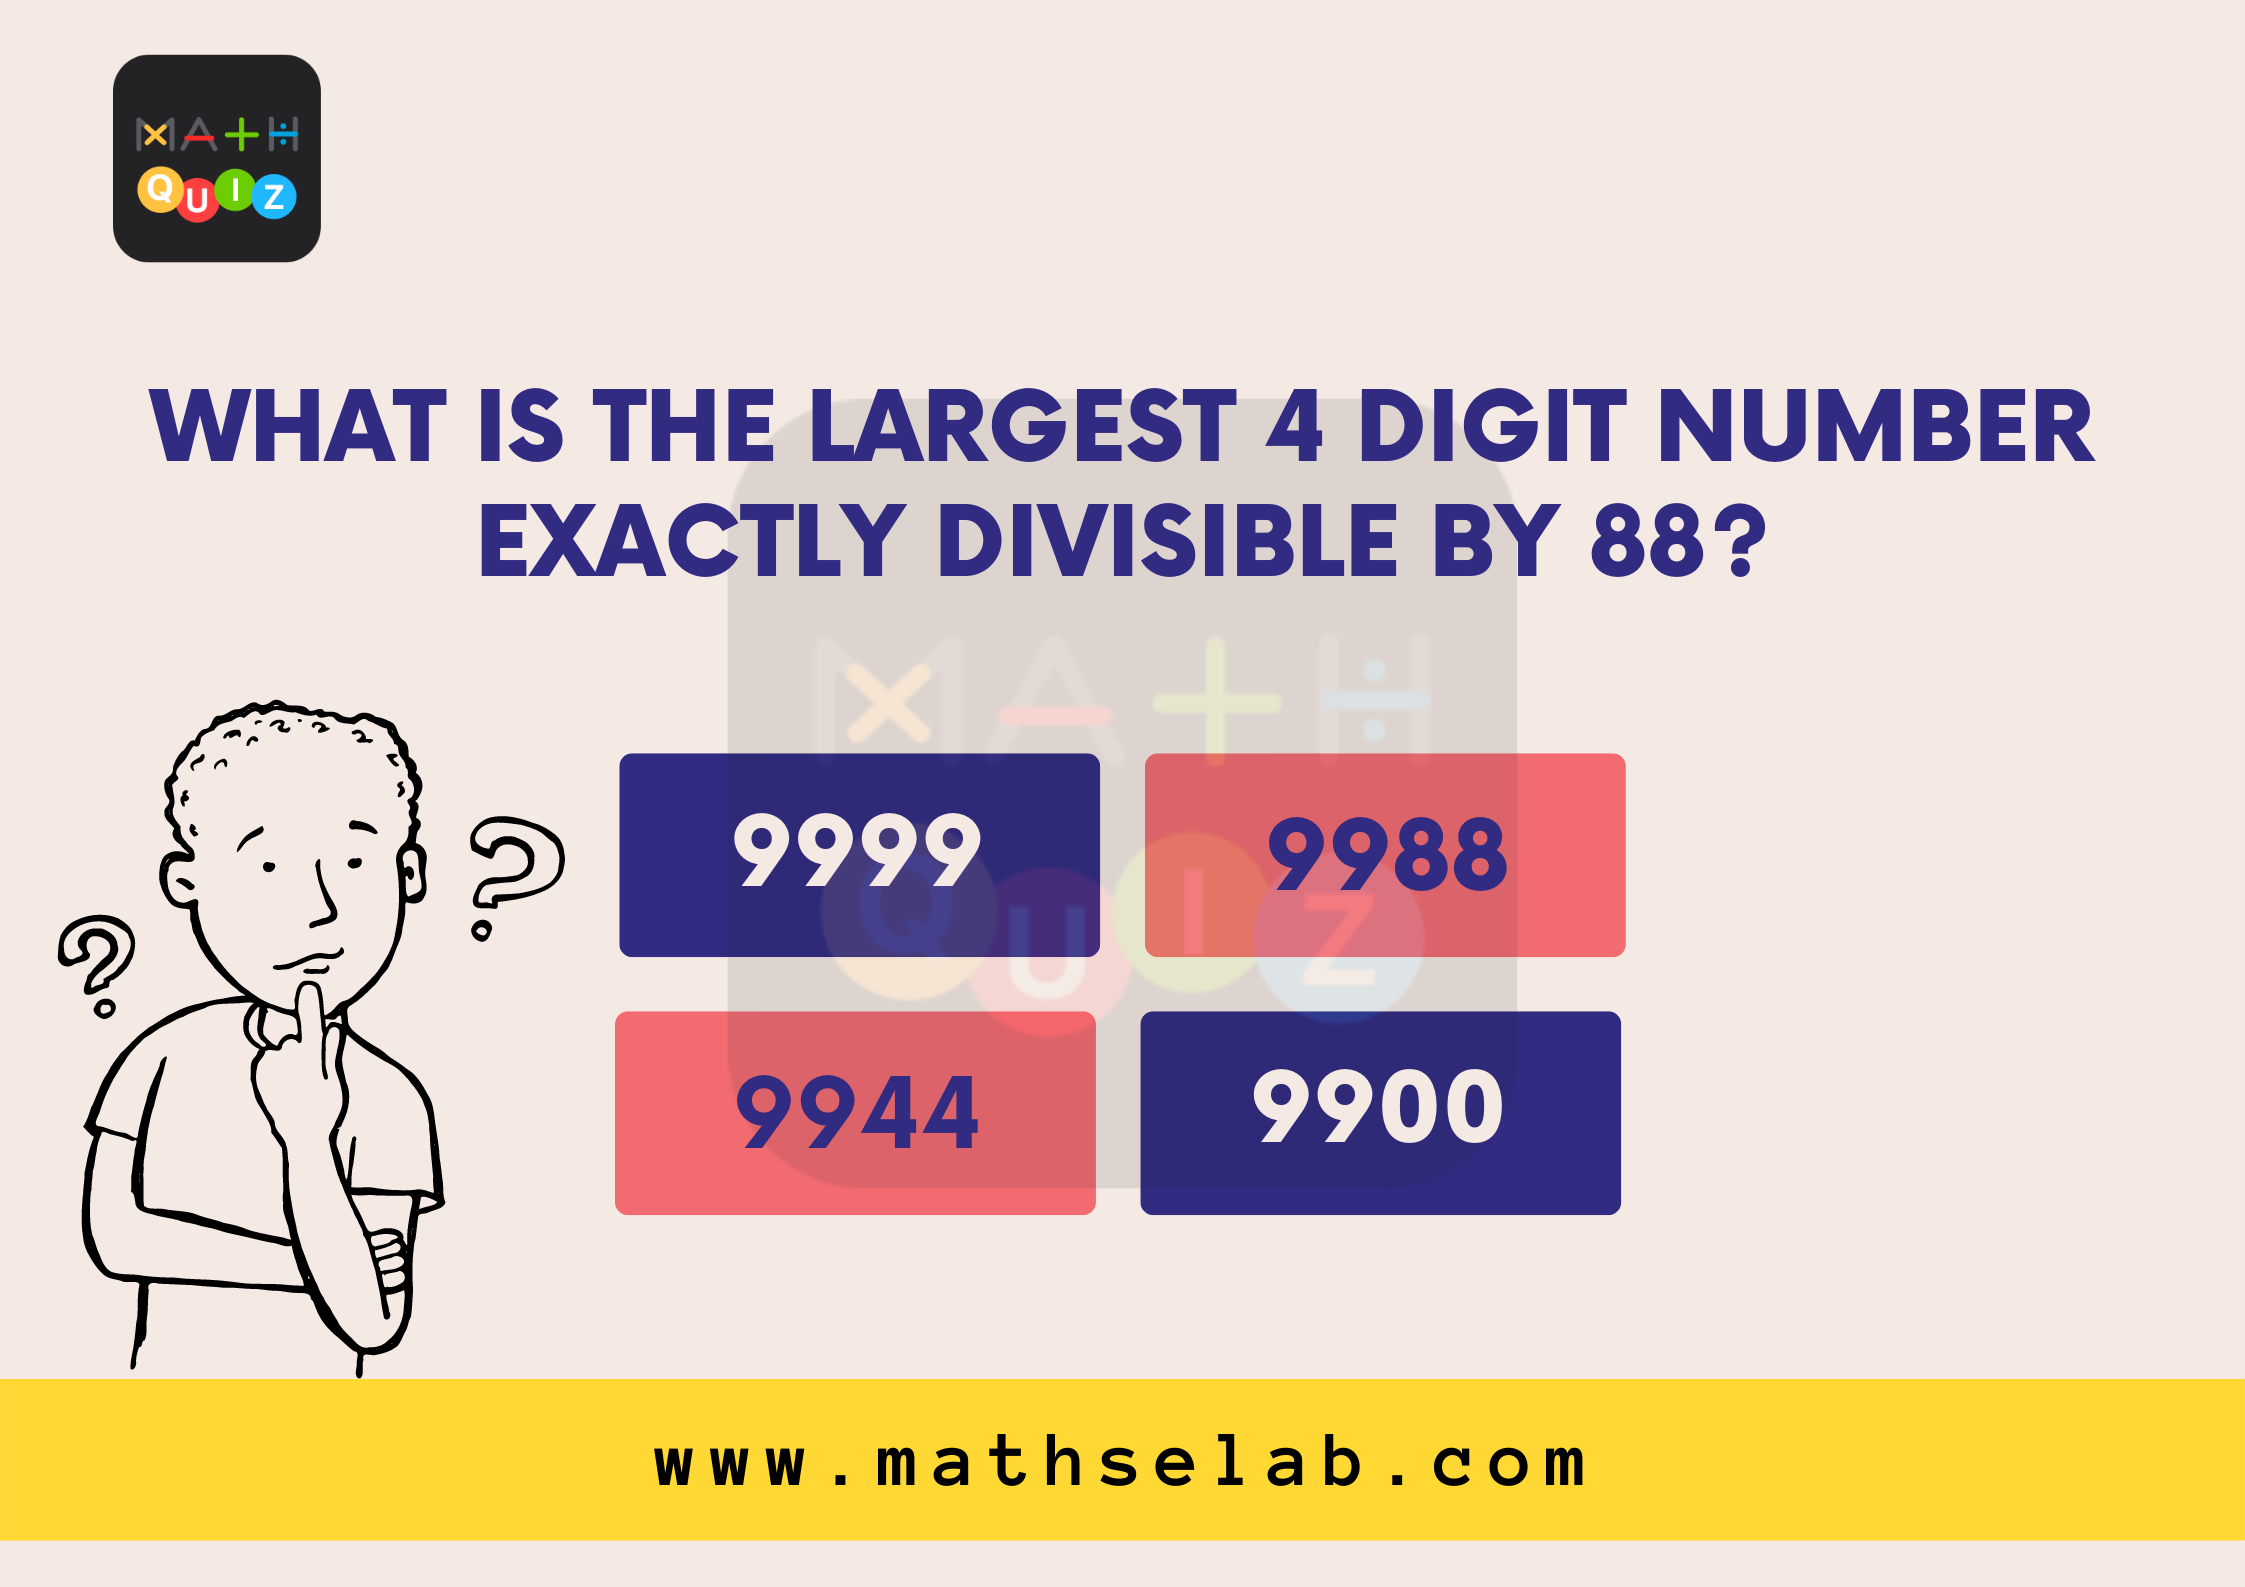 What is the largest 4 digit number exactly divisible by 88? - mathselab.com